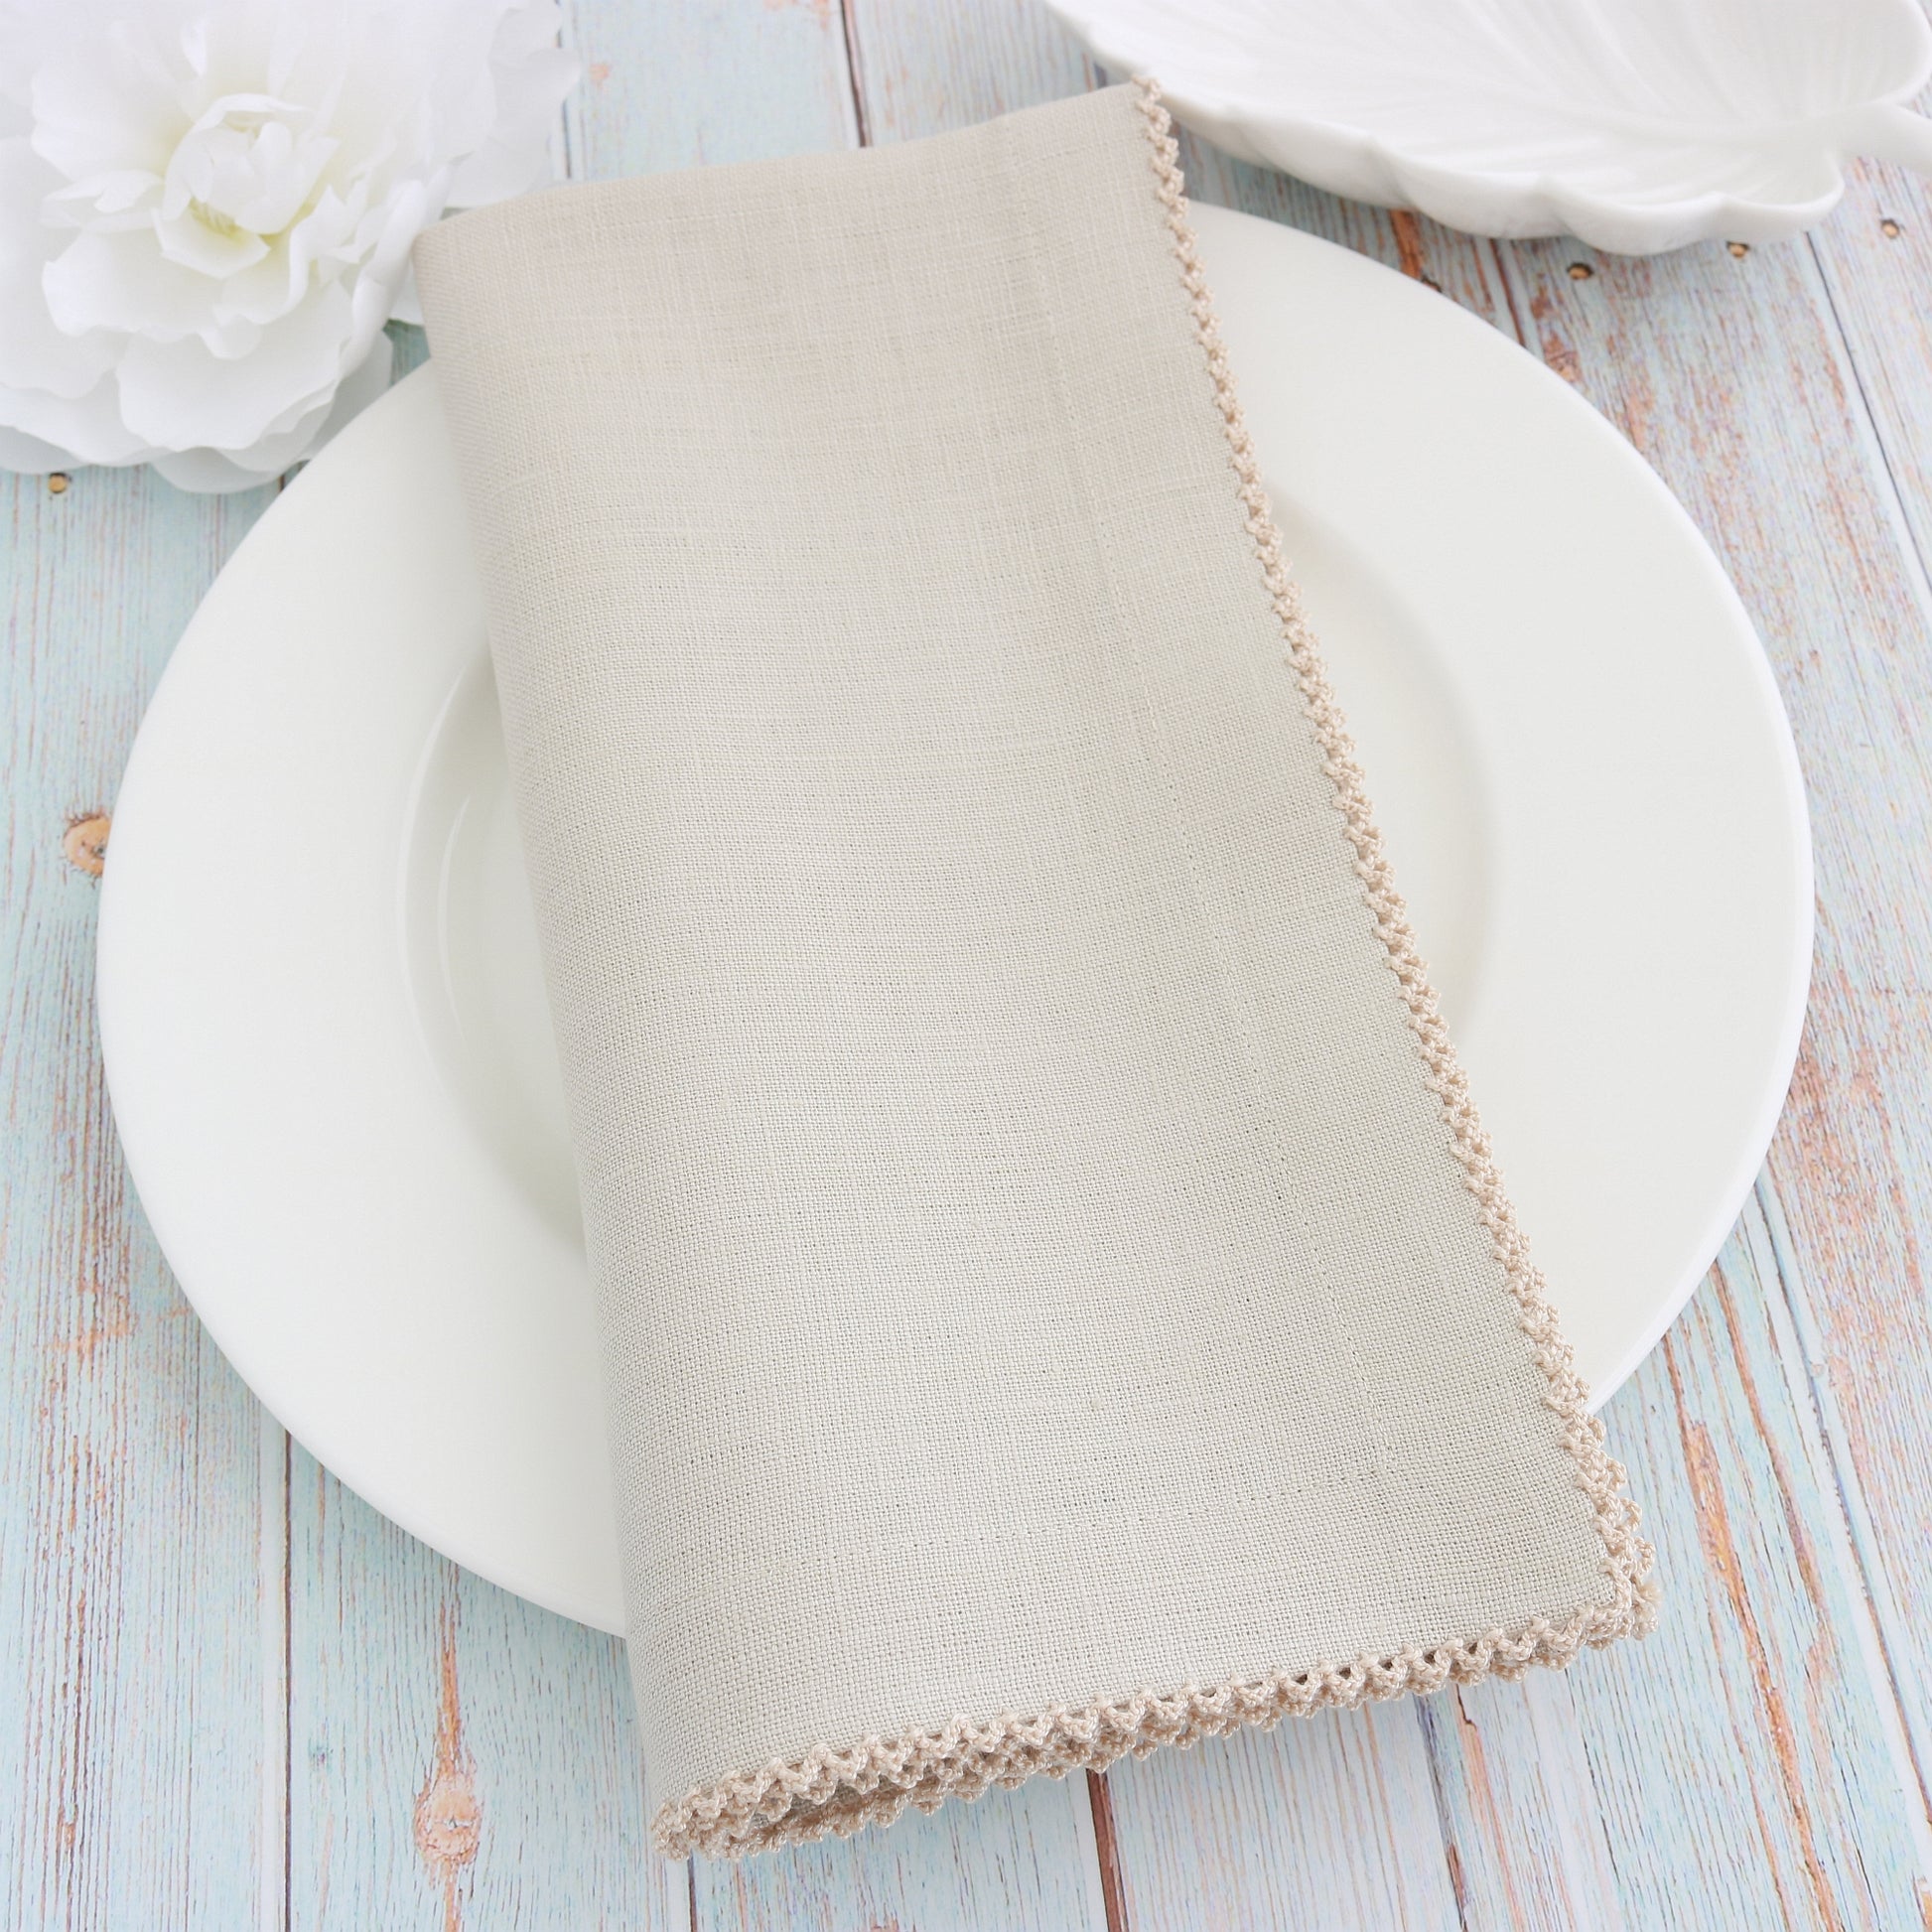 place setting with Sand linen napkin and Natural picot trim